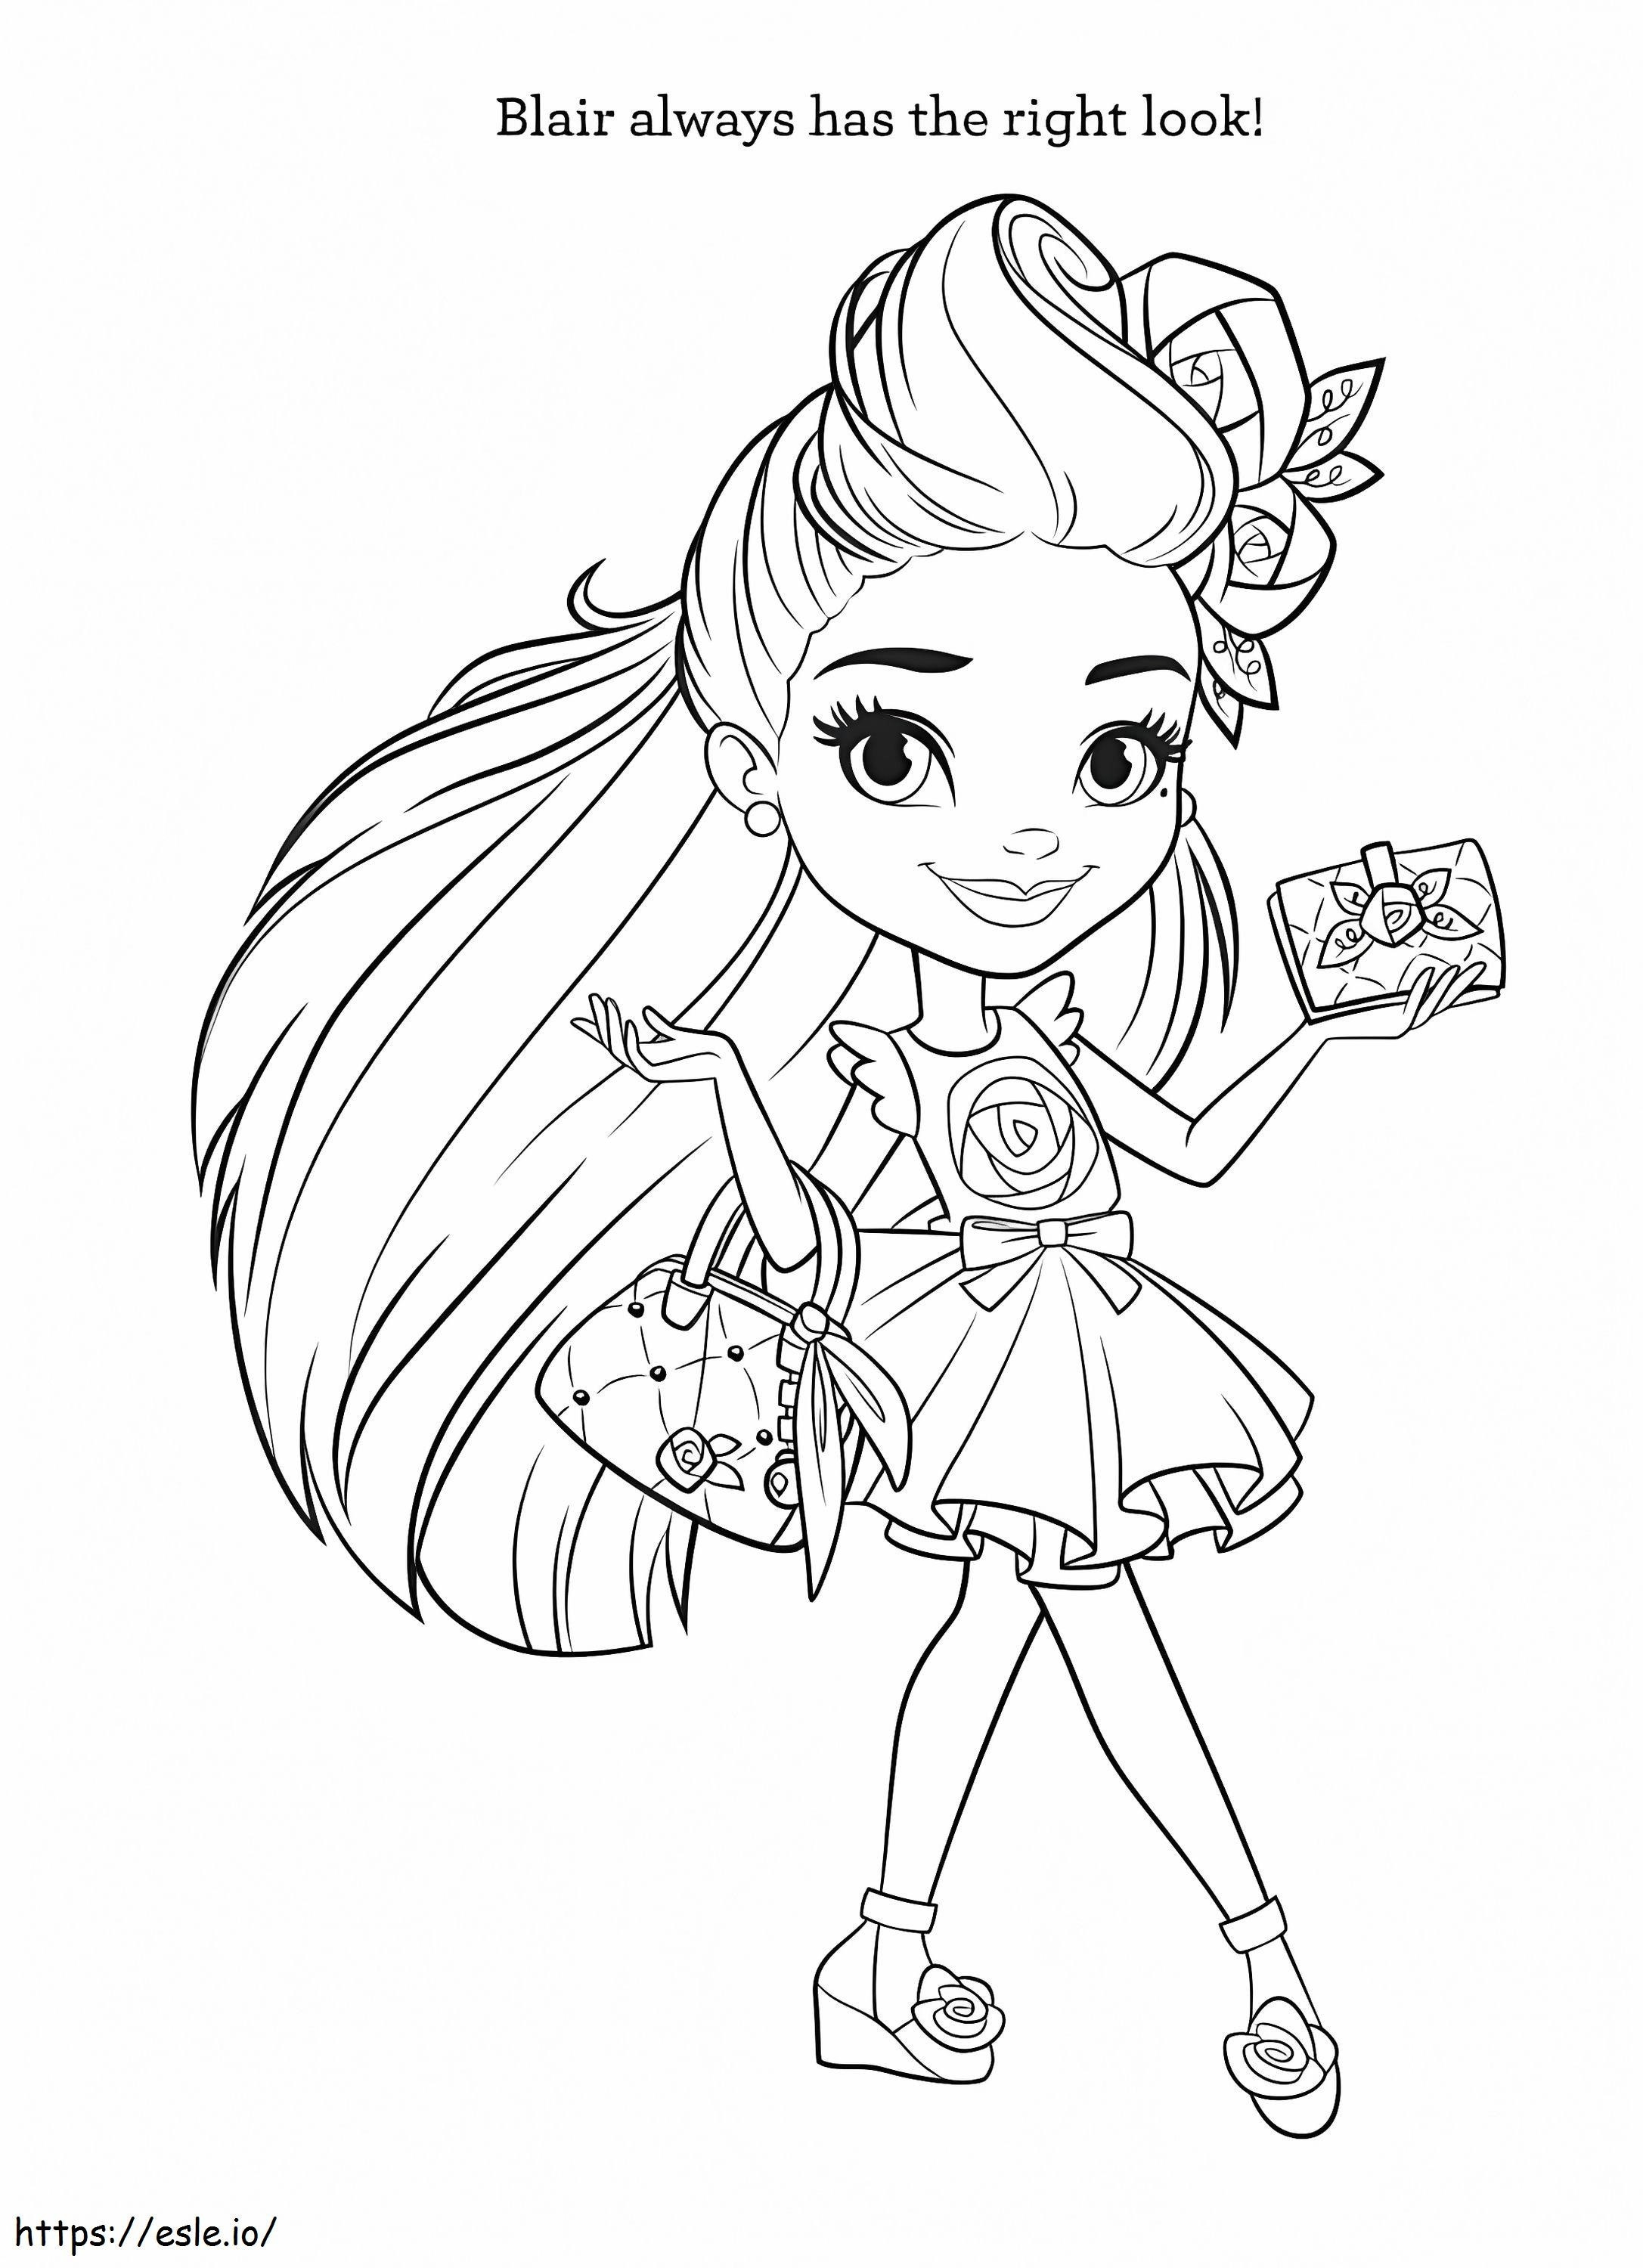 Blair In Sunny Day coloring page